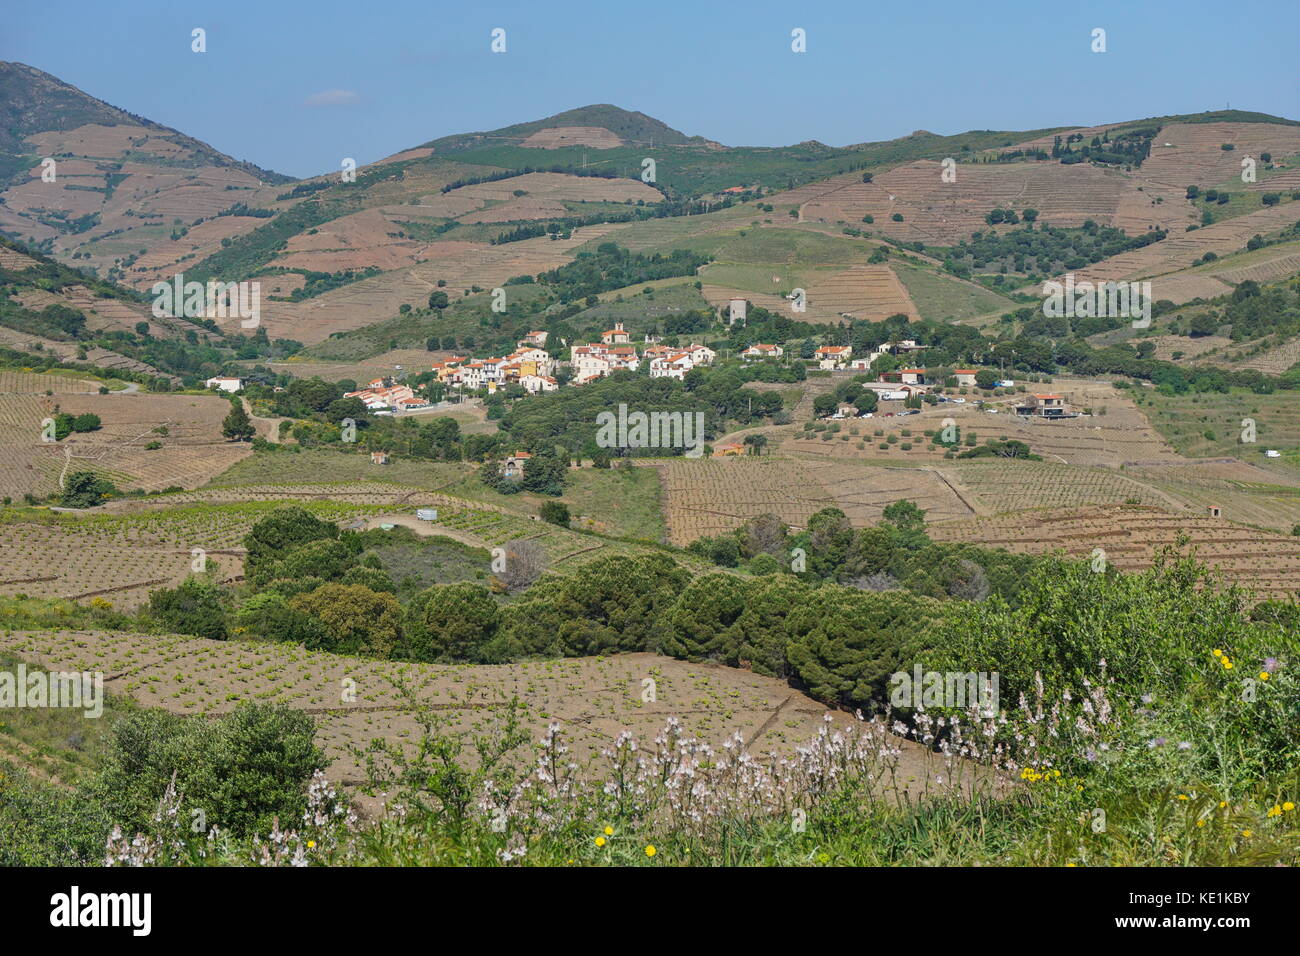 France countryside landscape the Mediterranean village of Cosprons and vineyards fields, Languedoc Roussillon, Pyrenees Orientales Stock Photo